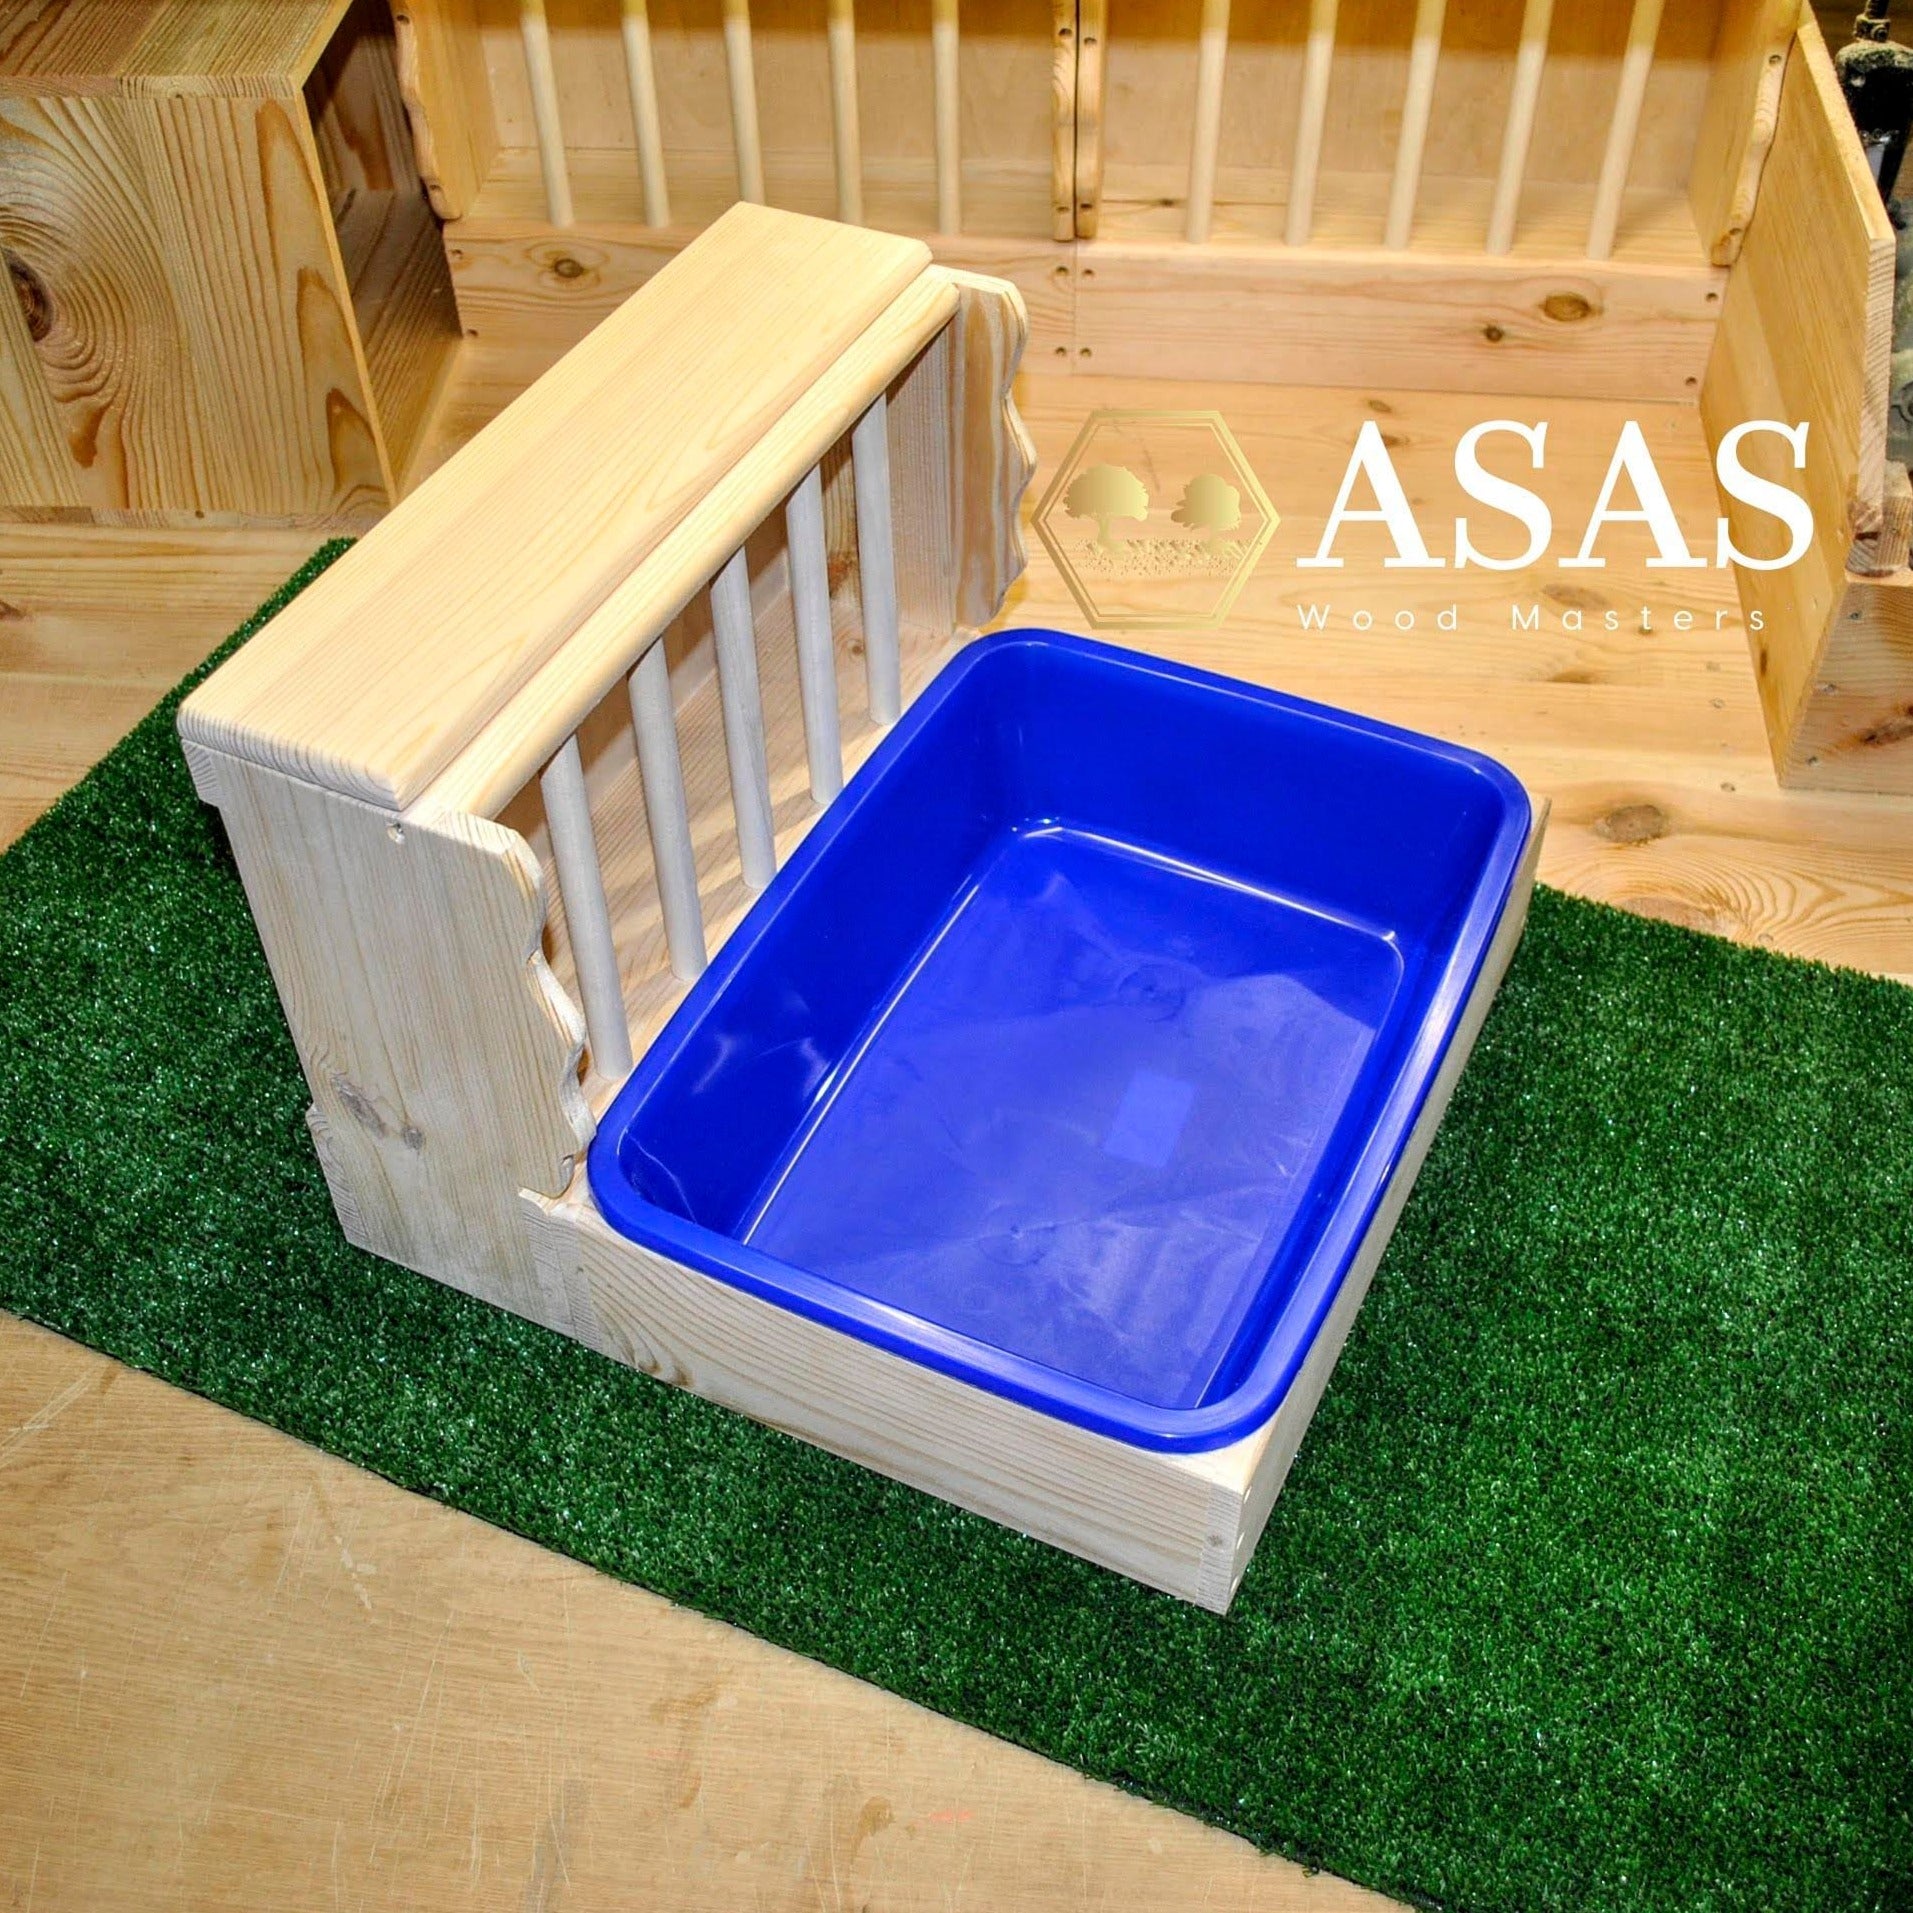 rabbit hay feeder with wooden sides to protect hay and litter box